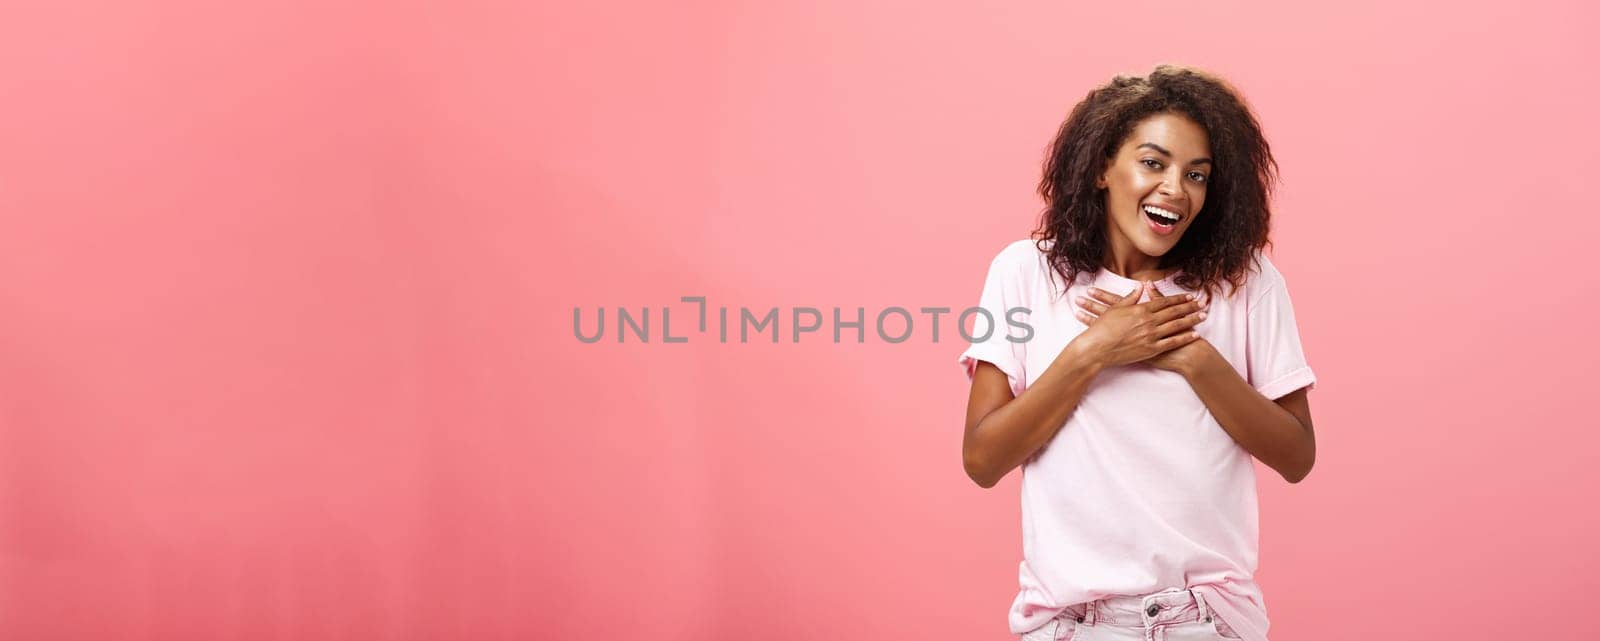 Portrait of charming delighted african american woman with curly haircut holding palms on heart pleased and grateful thanking friend for help smiling happily and thankful at camera over pink wall. Lifestyle.